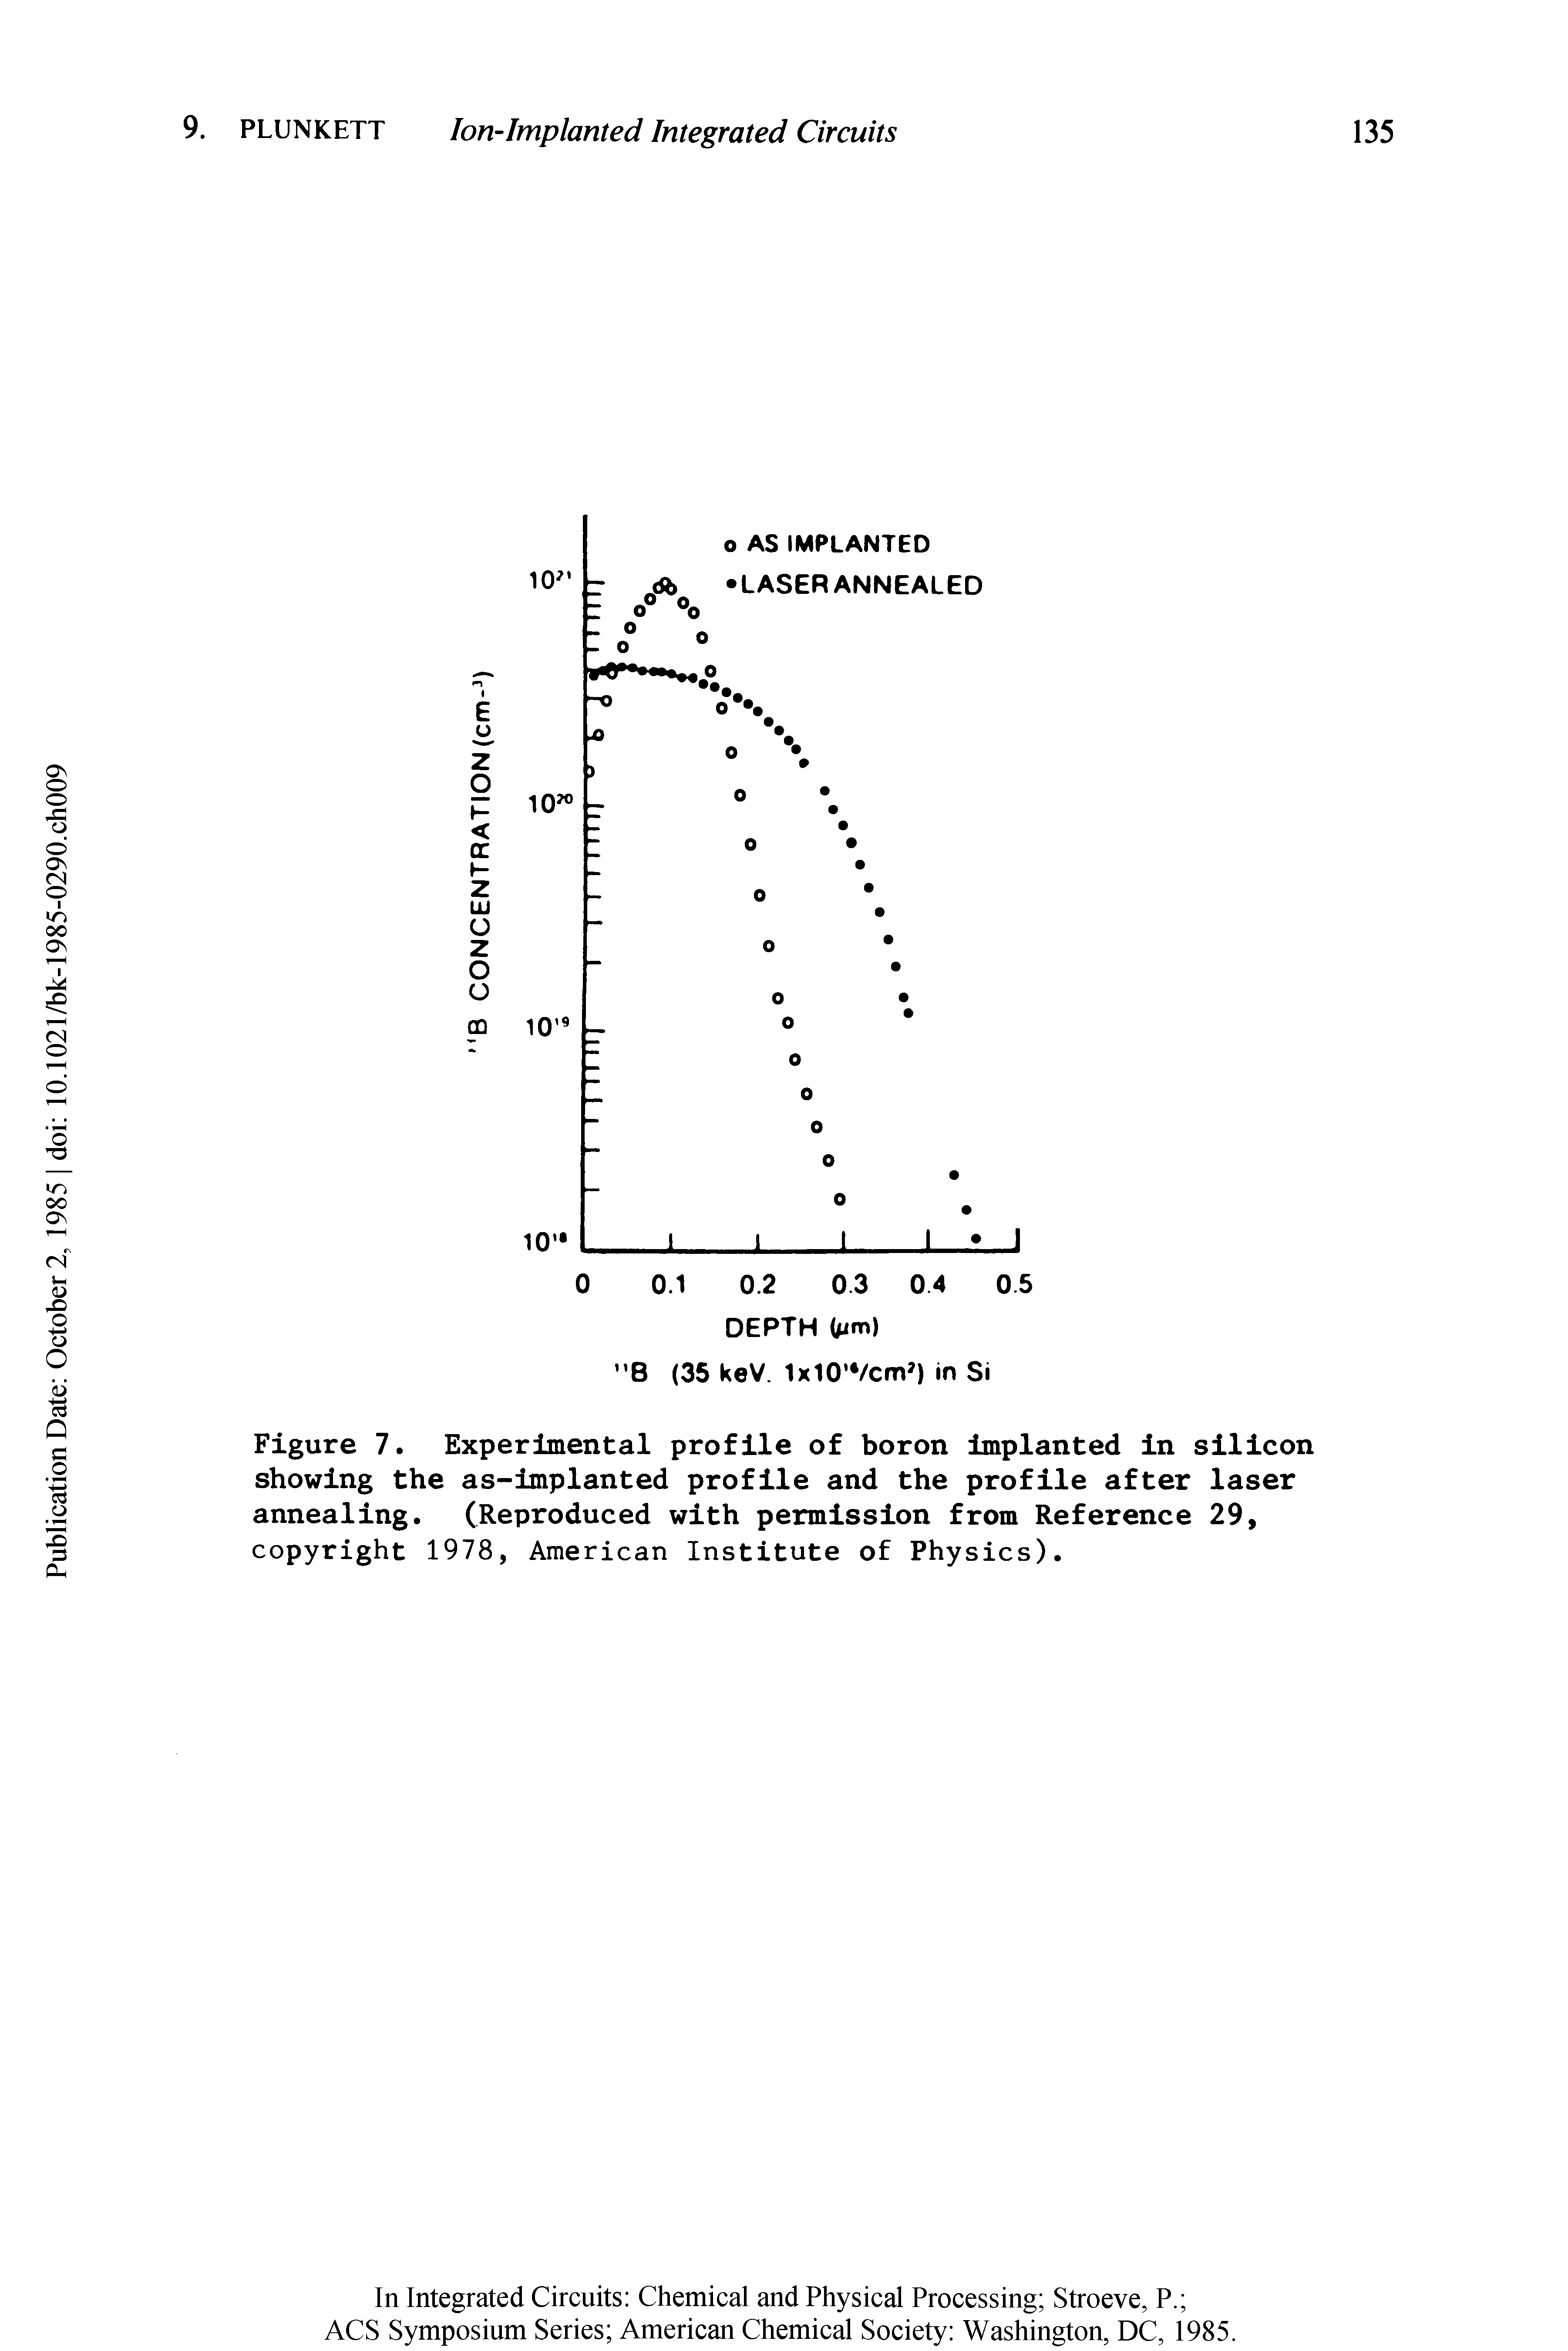 Figure 7. Experimental profile of boron implanted in silicon showing the as-implanted profile and the profile after laser annealing. (Reproduced with permission from Reference 29, copyright 1978, American Institute of Physics).